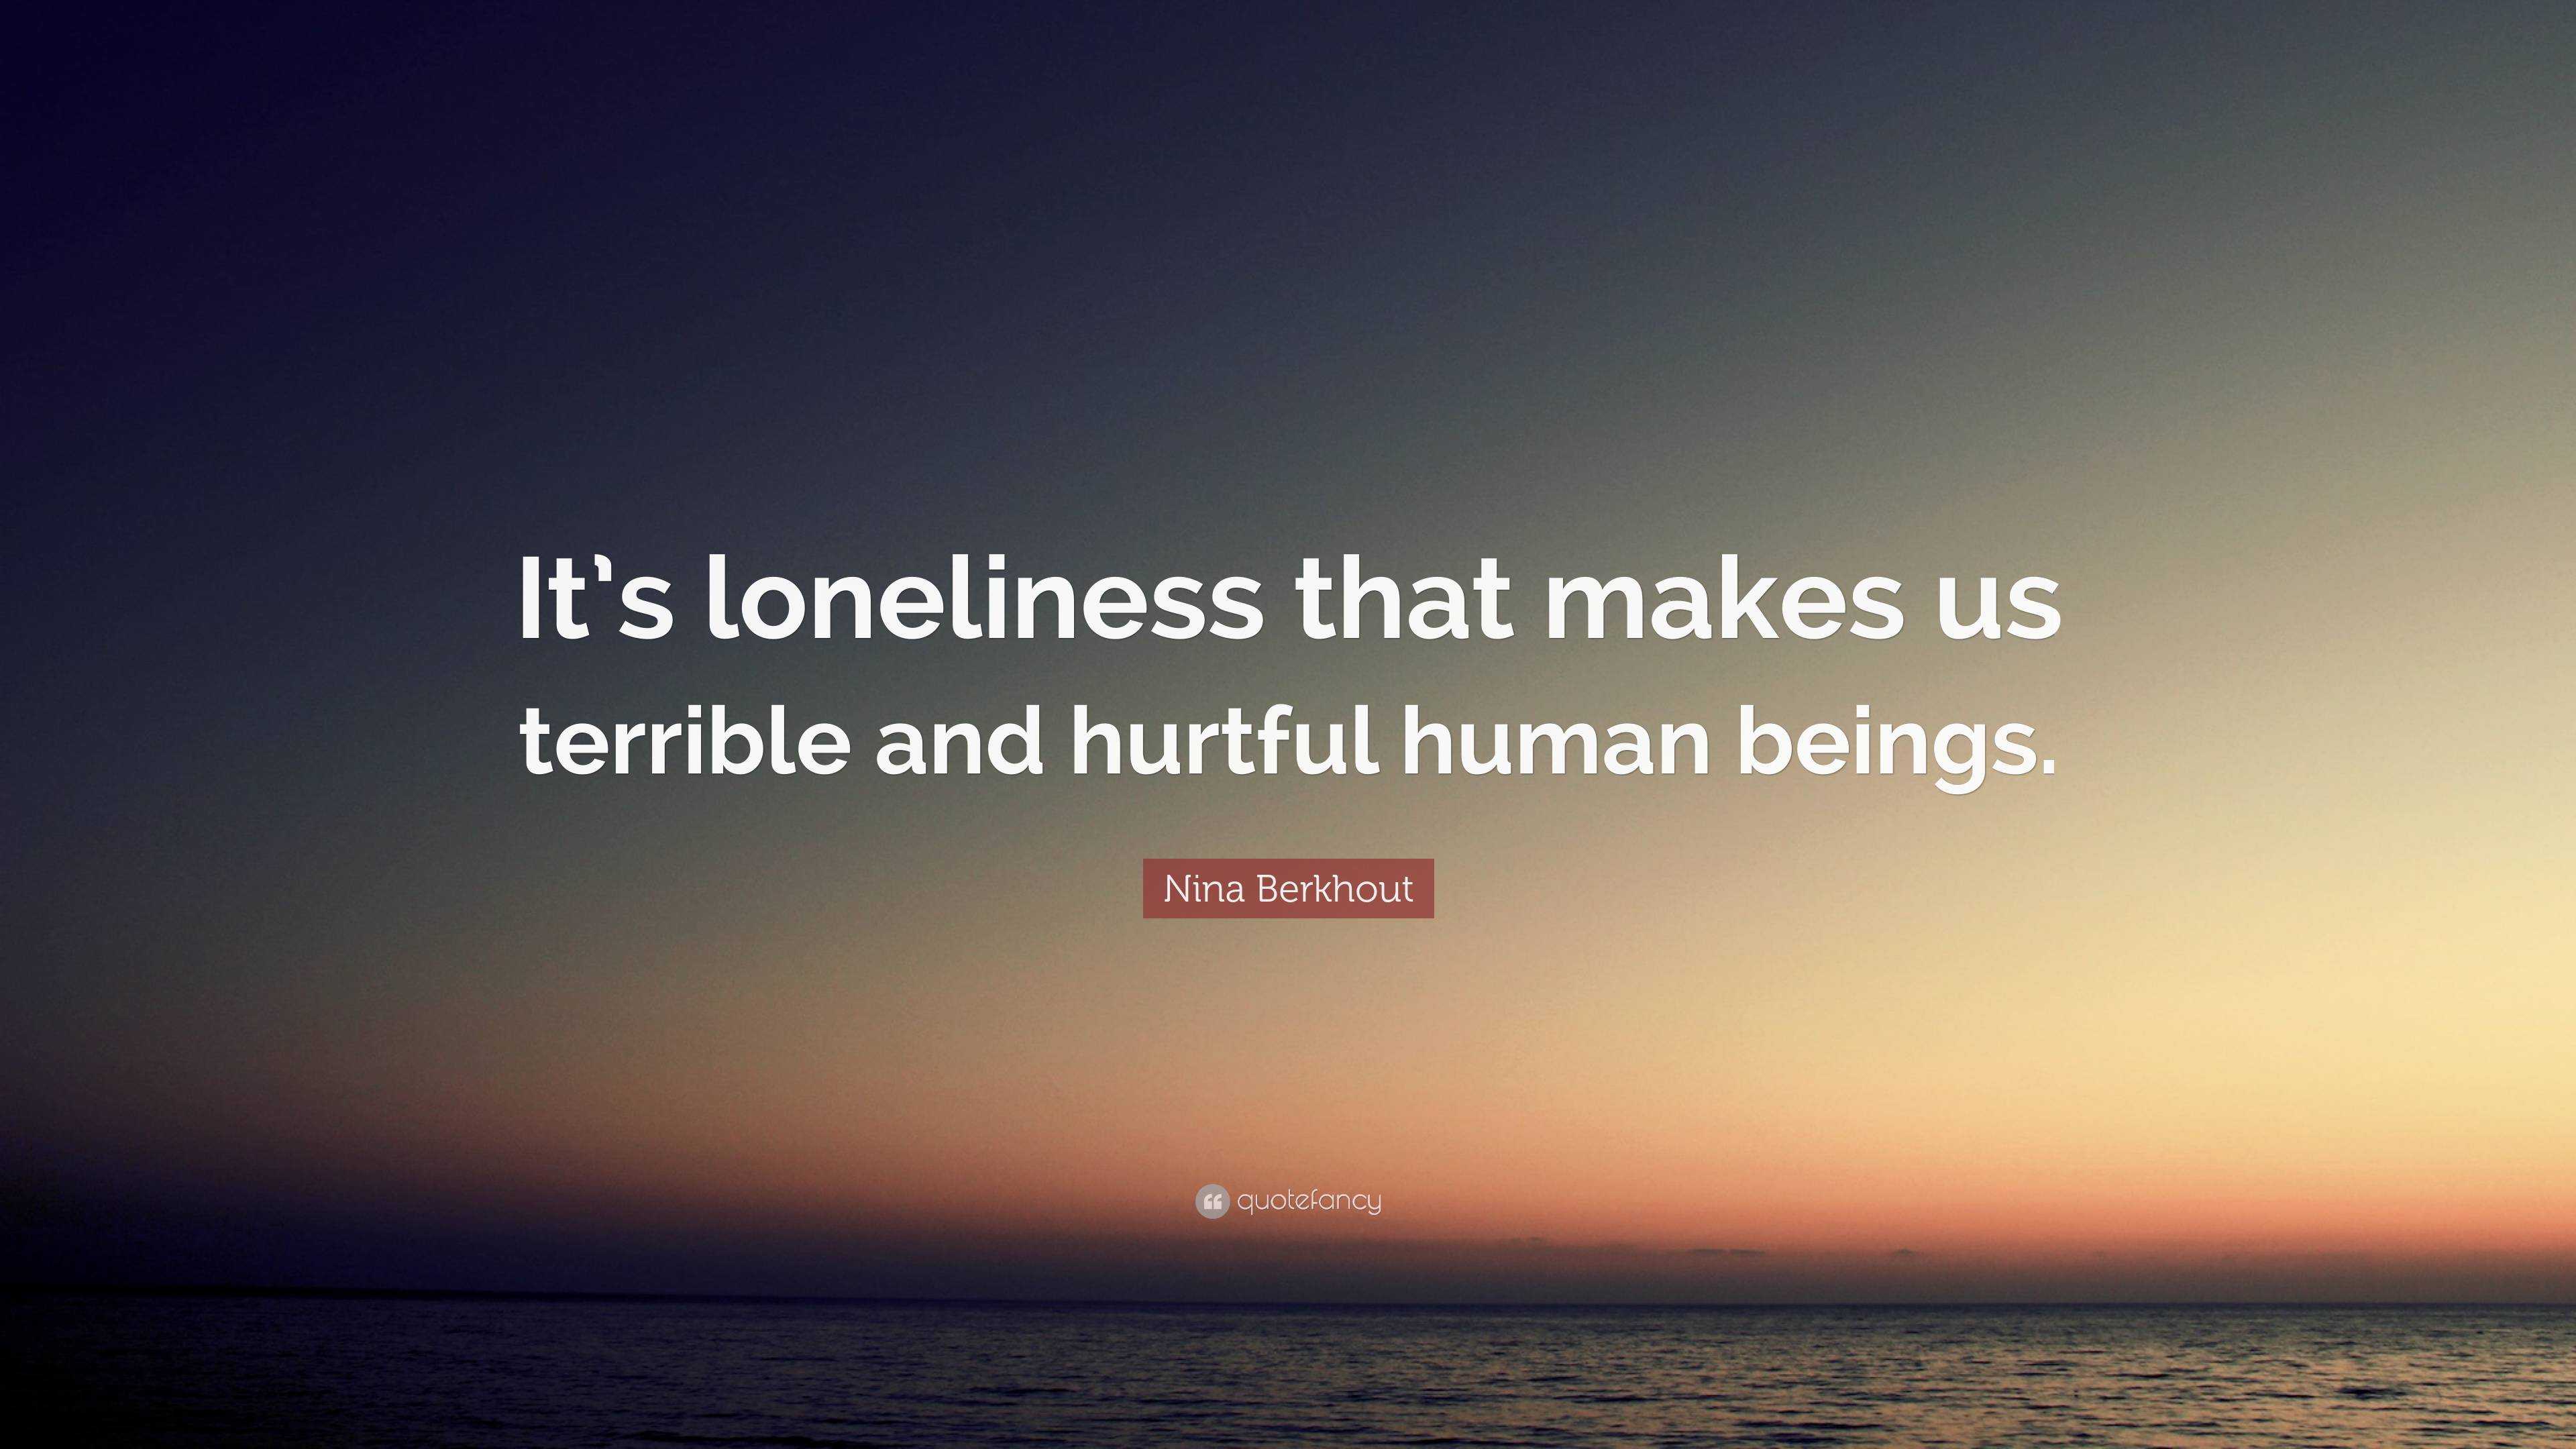 Nina Berkhout Quote: “It’s loneliness that makes us terrible and ...